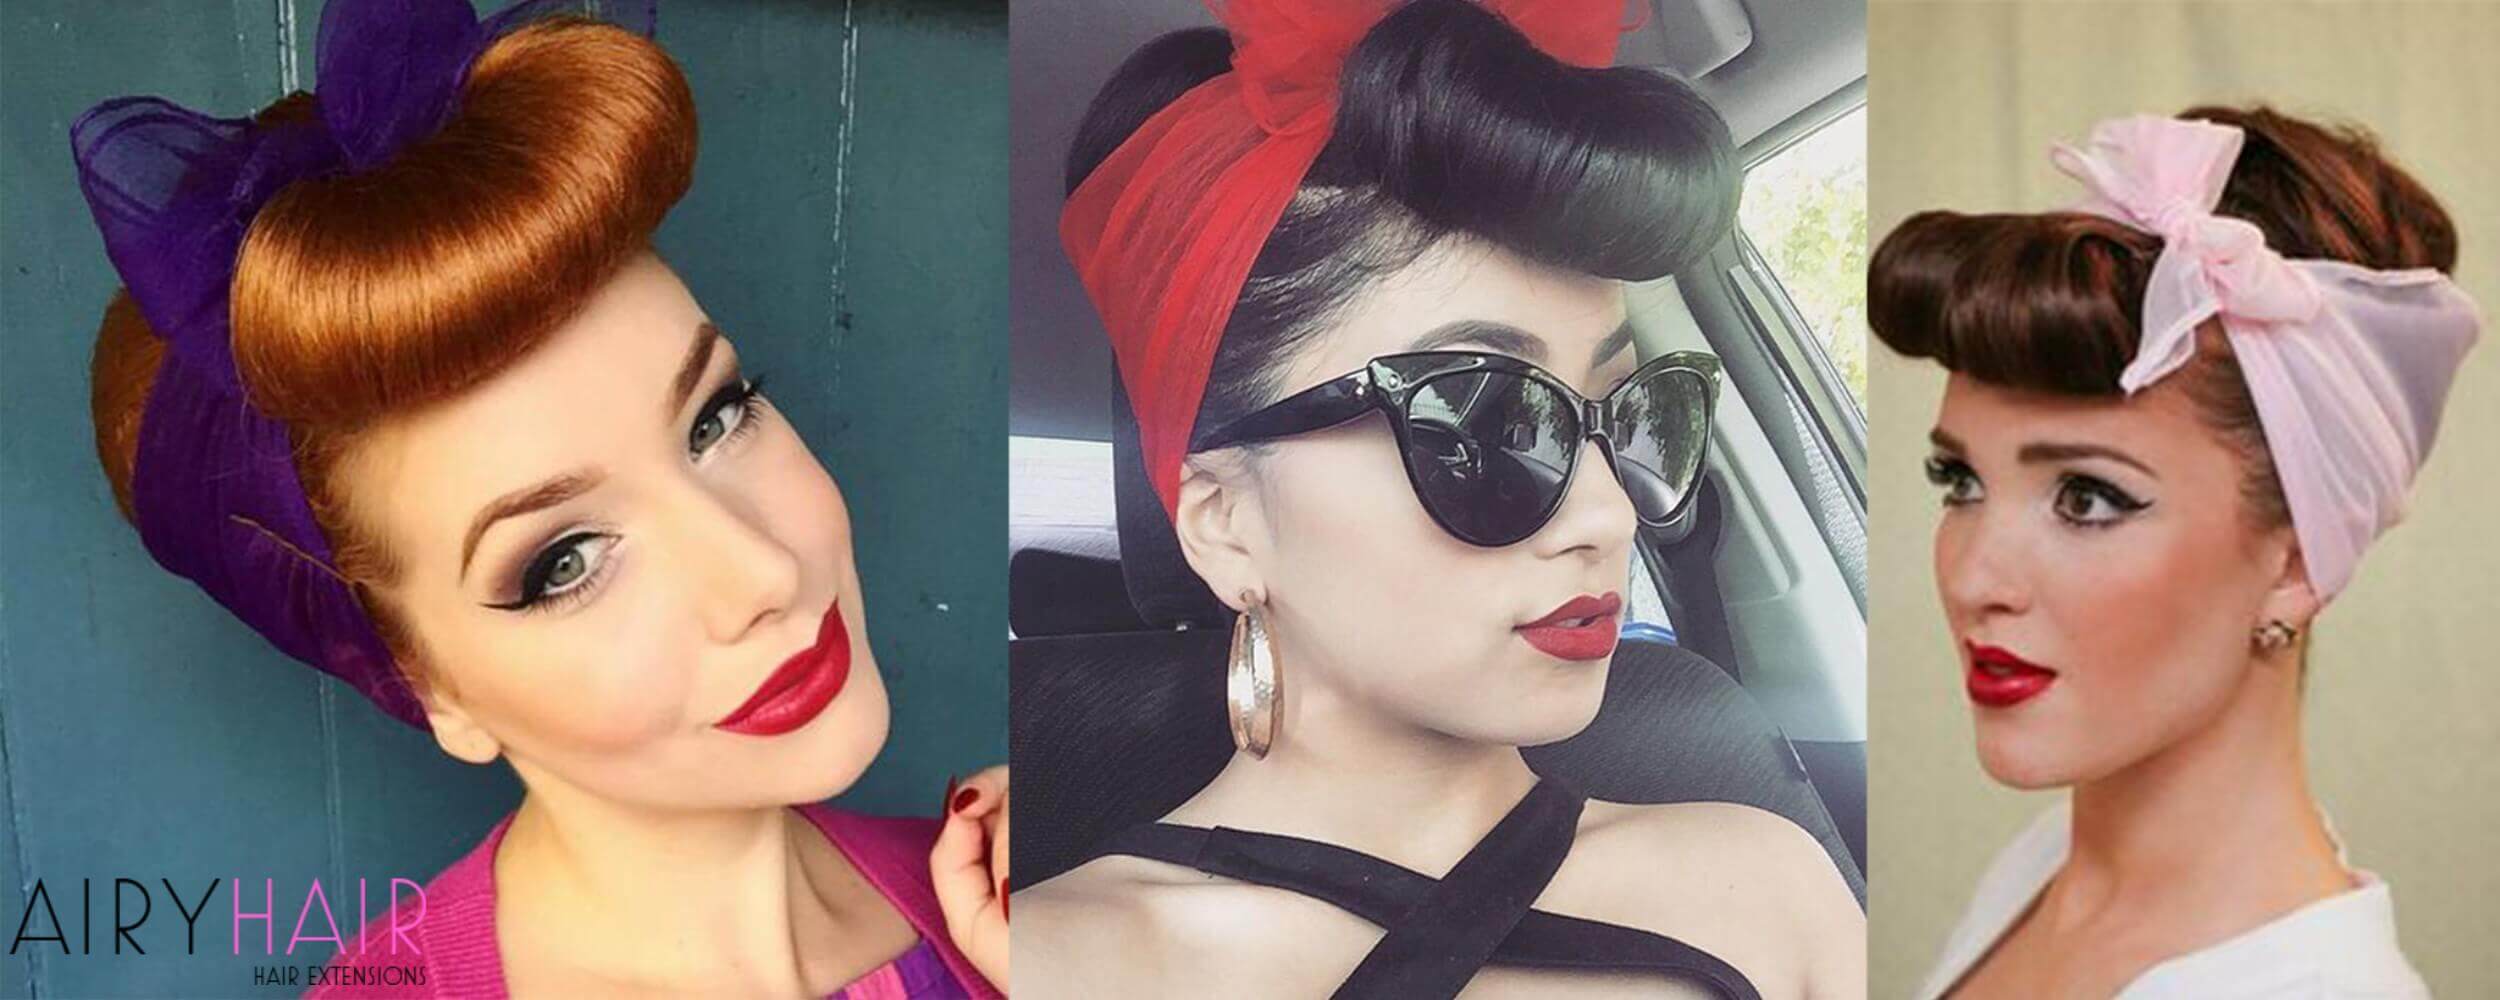 Top 13 Confident Rockabilly Pinup Hairstyles 2020